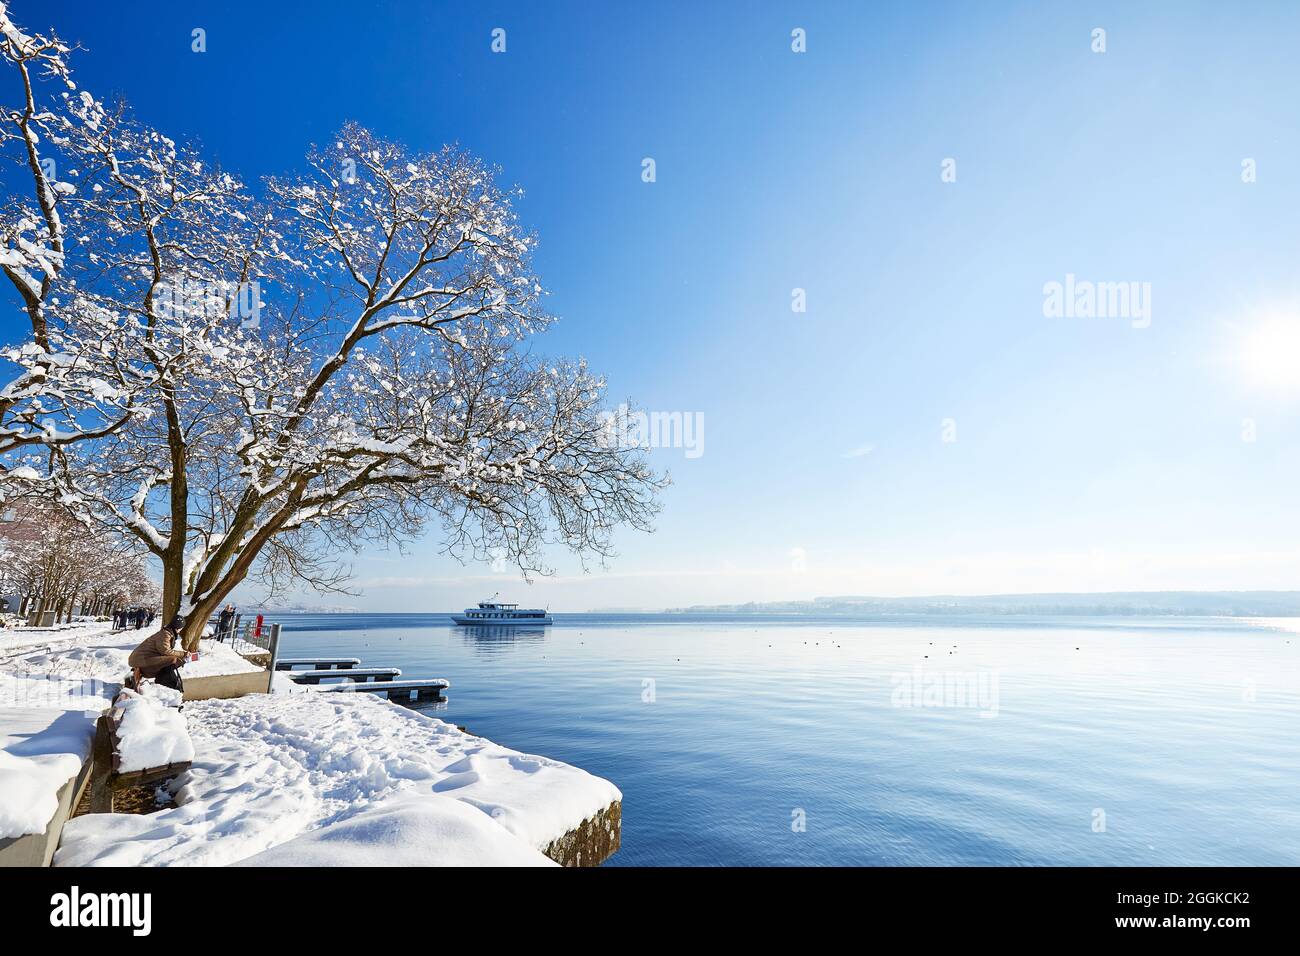 Germany, Baden-Wuerttemberg, Lake Constance, Überlingen on Lake Constance, winter landscape, view of Lake Constance Stock Photo